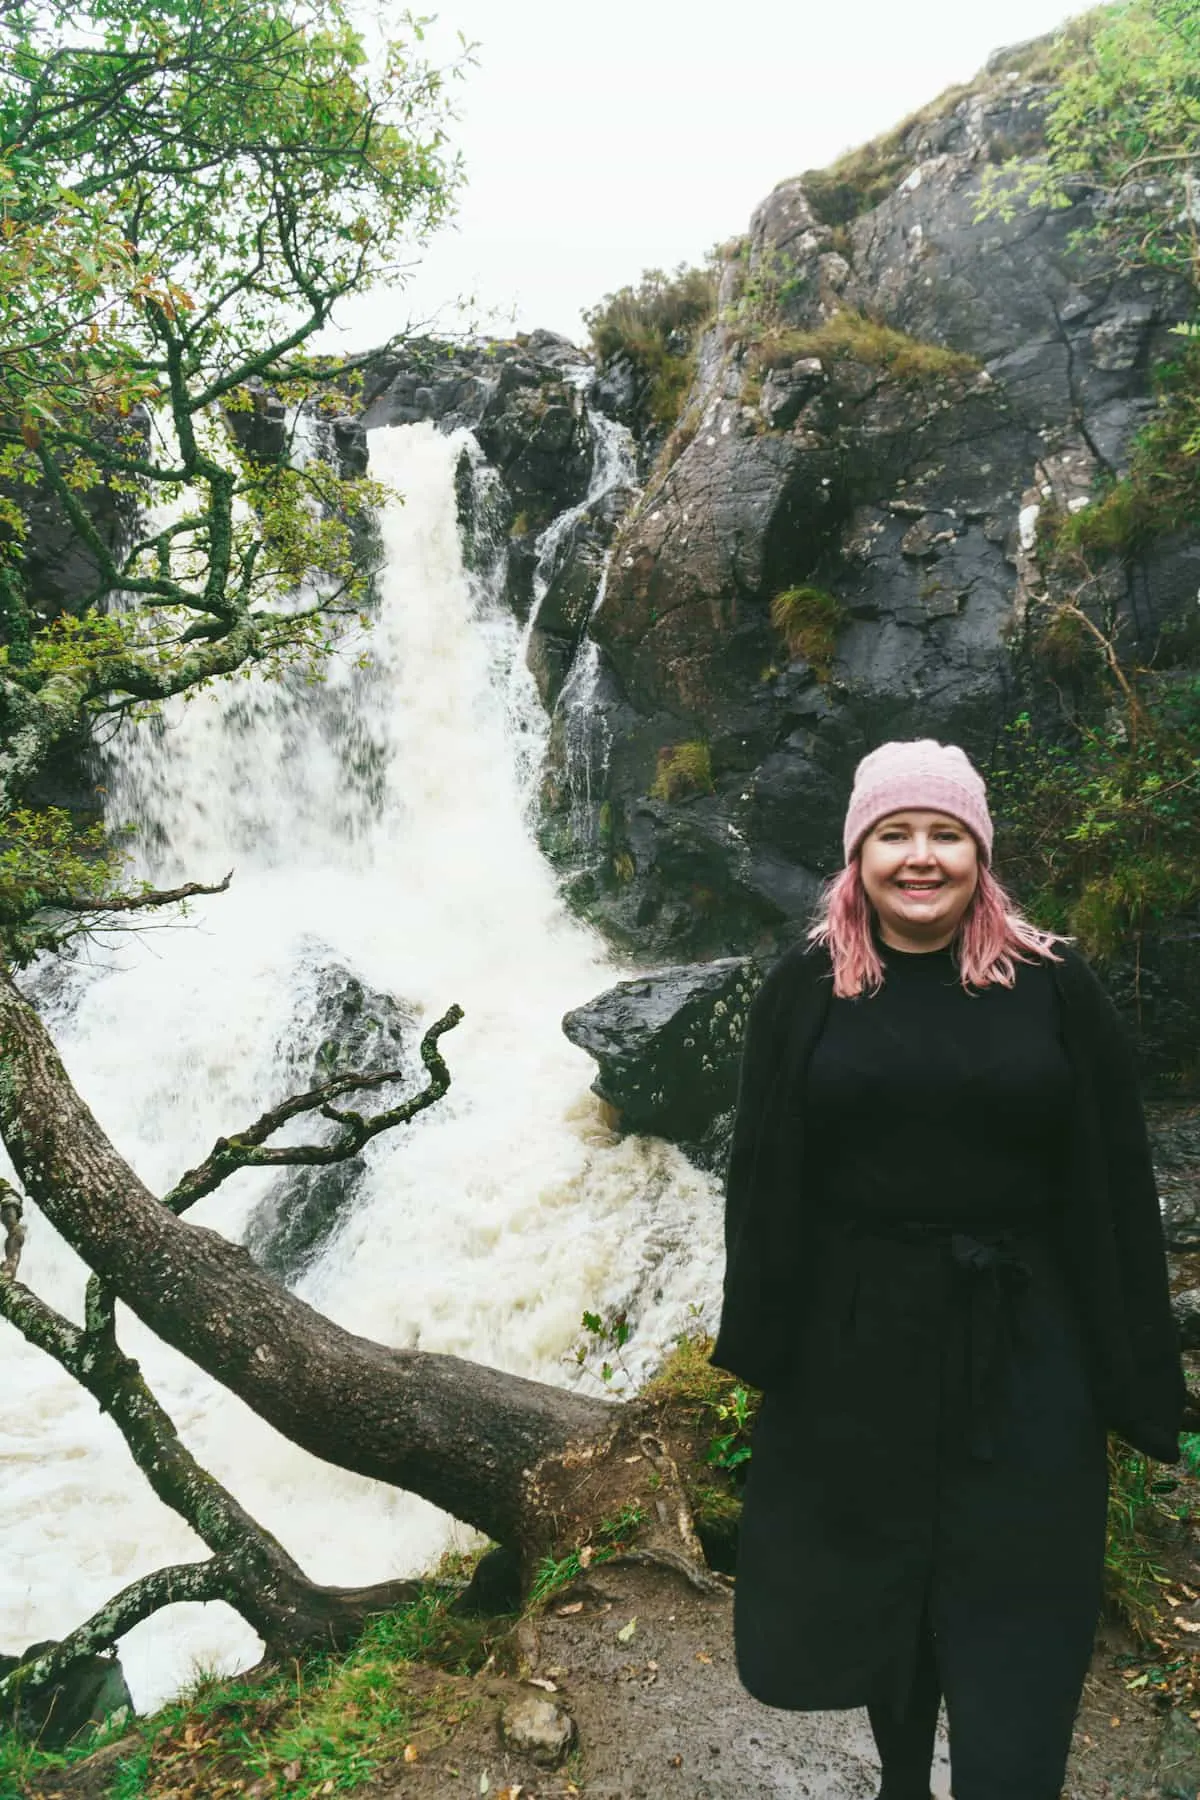 Kat at a waterfall on the Isle of Mull